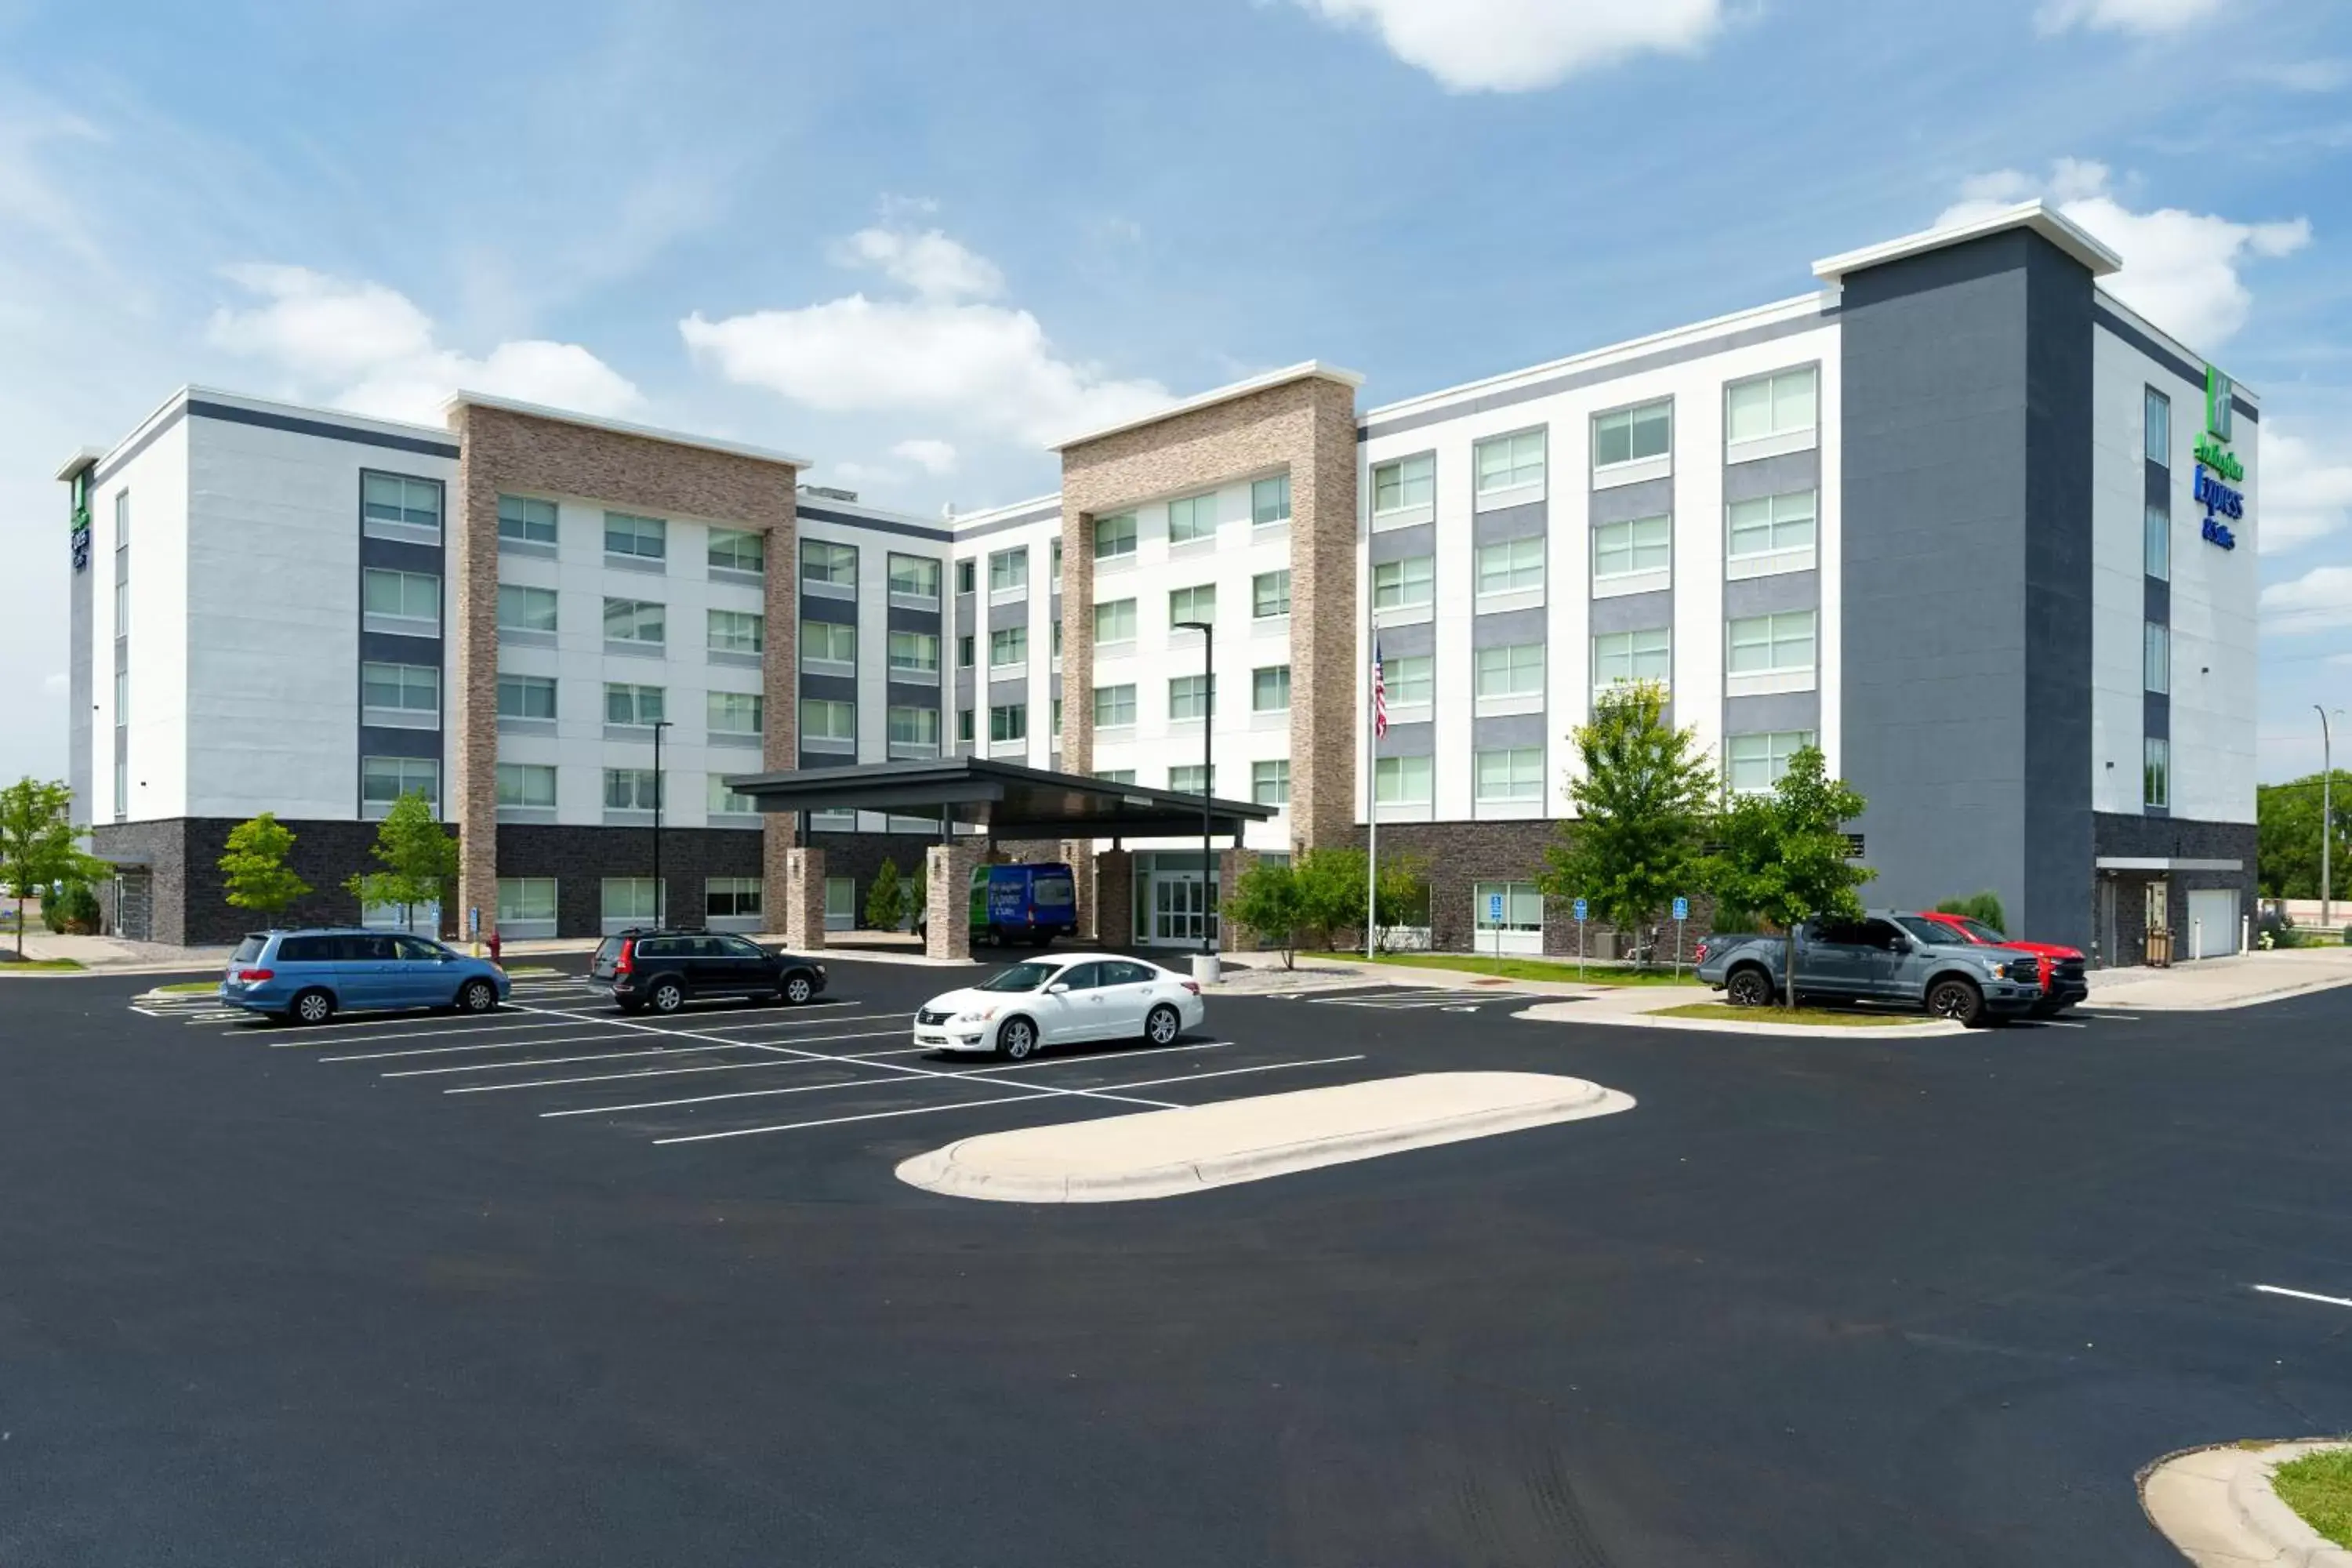 Property Building in Holiday Inn Express & Suites - Mall of America - MSP Airport, an IHG Hotel